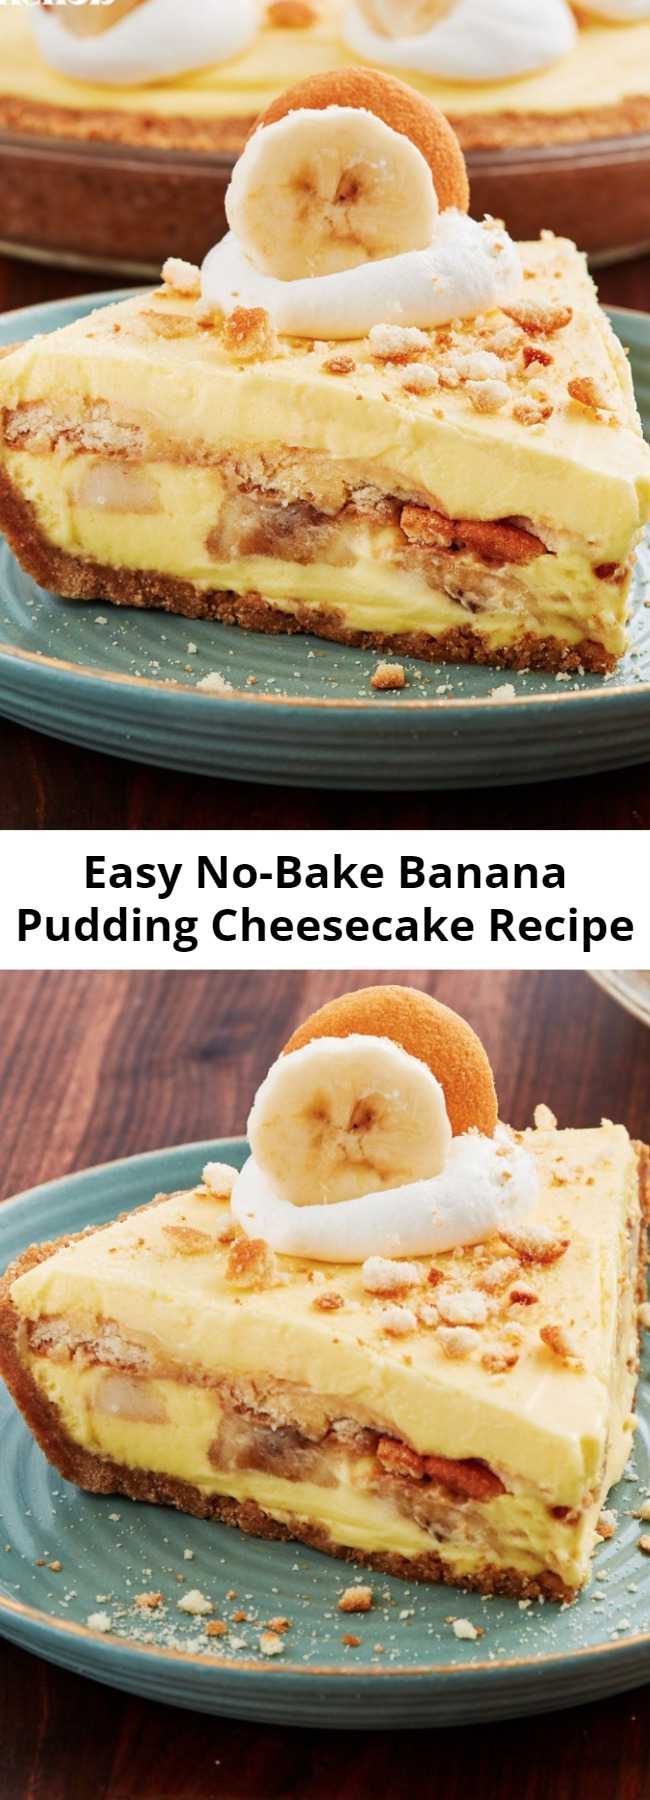 Easy No-Bake Banana Pudding Cheesecake Recipe - Banana pudding makes our heart sing — it's the world's perfect dessert: Classy enough to serve at a wedding, trashy enough to bring in an aluminum baking sheet to a barbecue. This Banana Pudding Cheesecake will make you feel things you've never felt before. #easy #recipe #banana #pudding #Nobake #cheesecake #creamcheese #dessert #nilla #bananapudding #parties